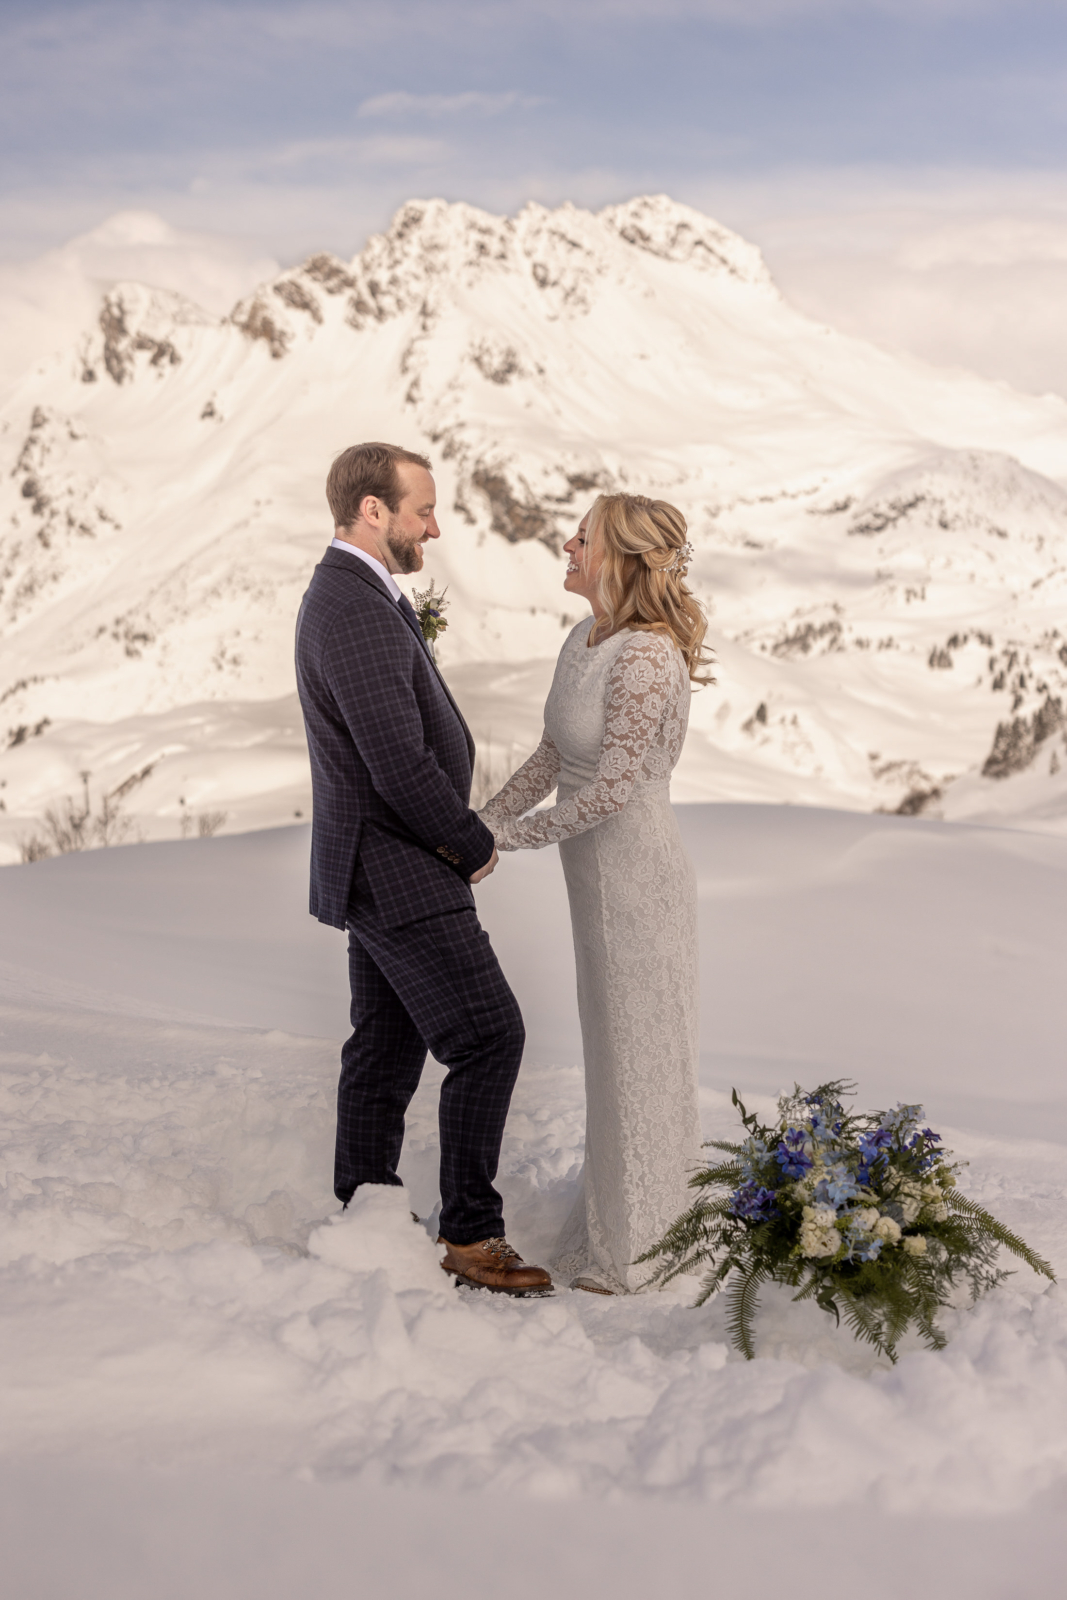 wedding ceremony in the snowy mountains